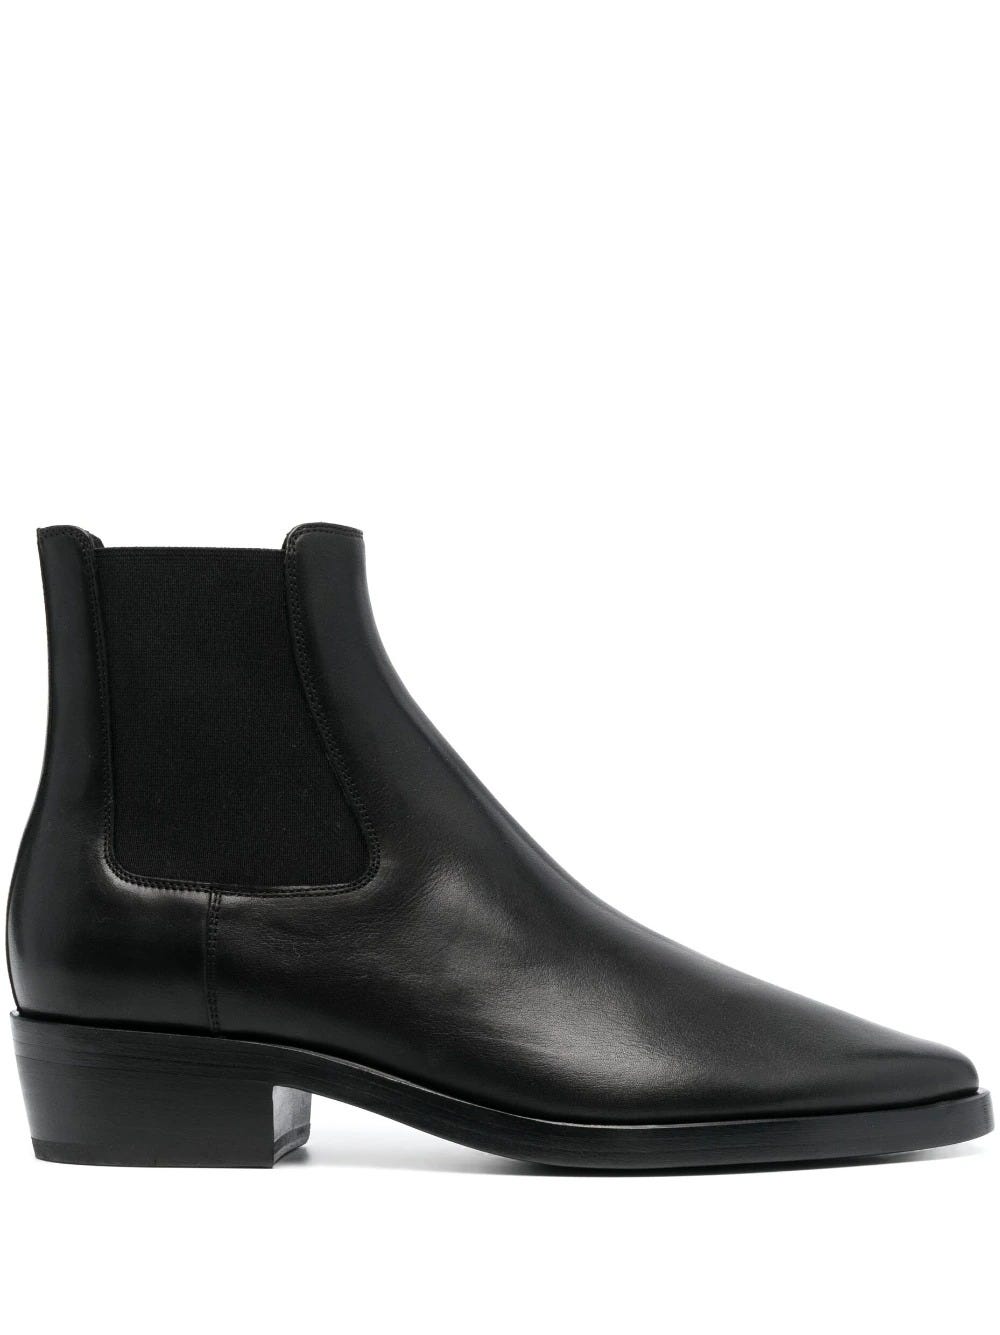 FEAR OF GOD POINTED CHELSEA ANKLE BOOTS